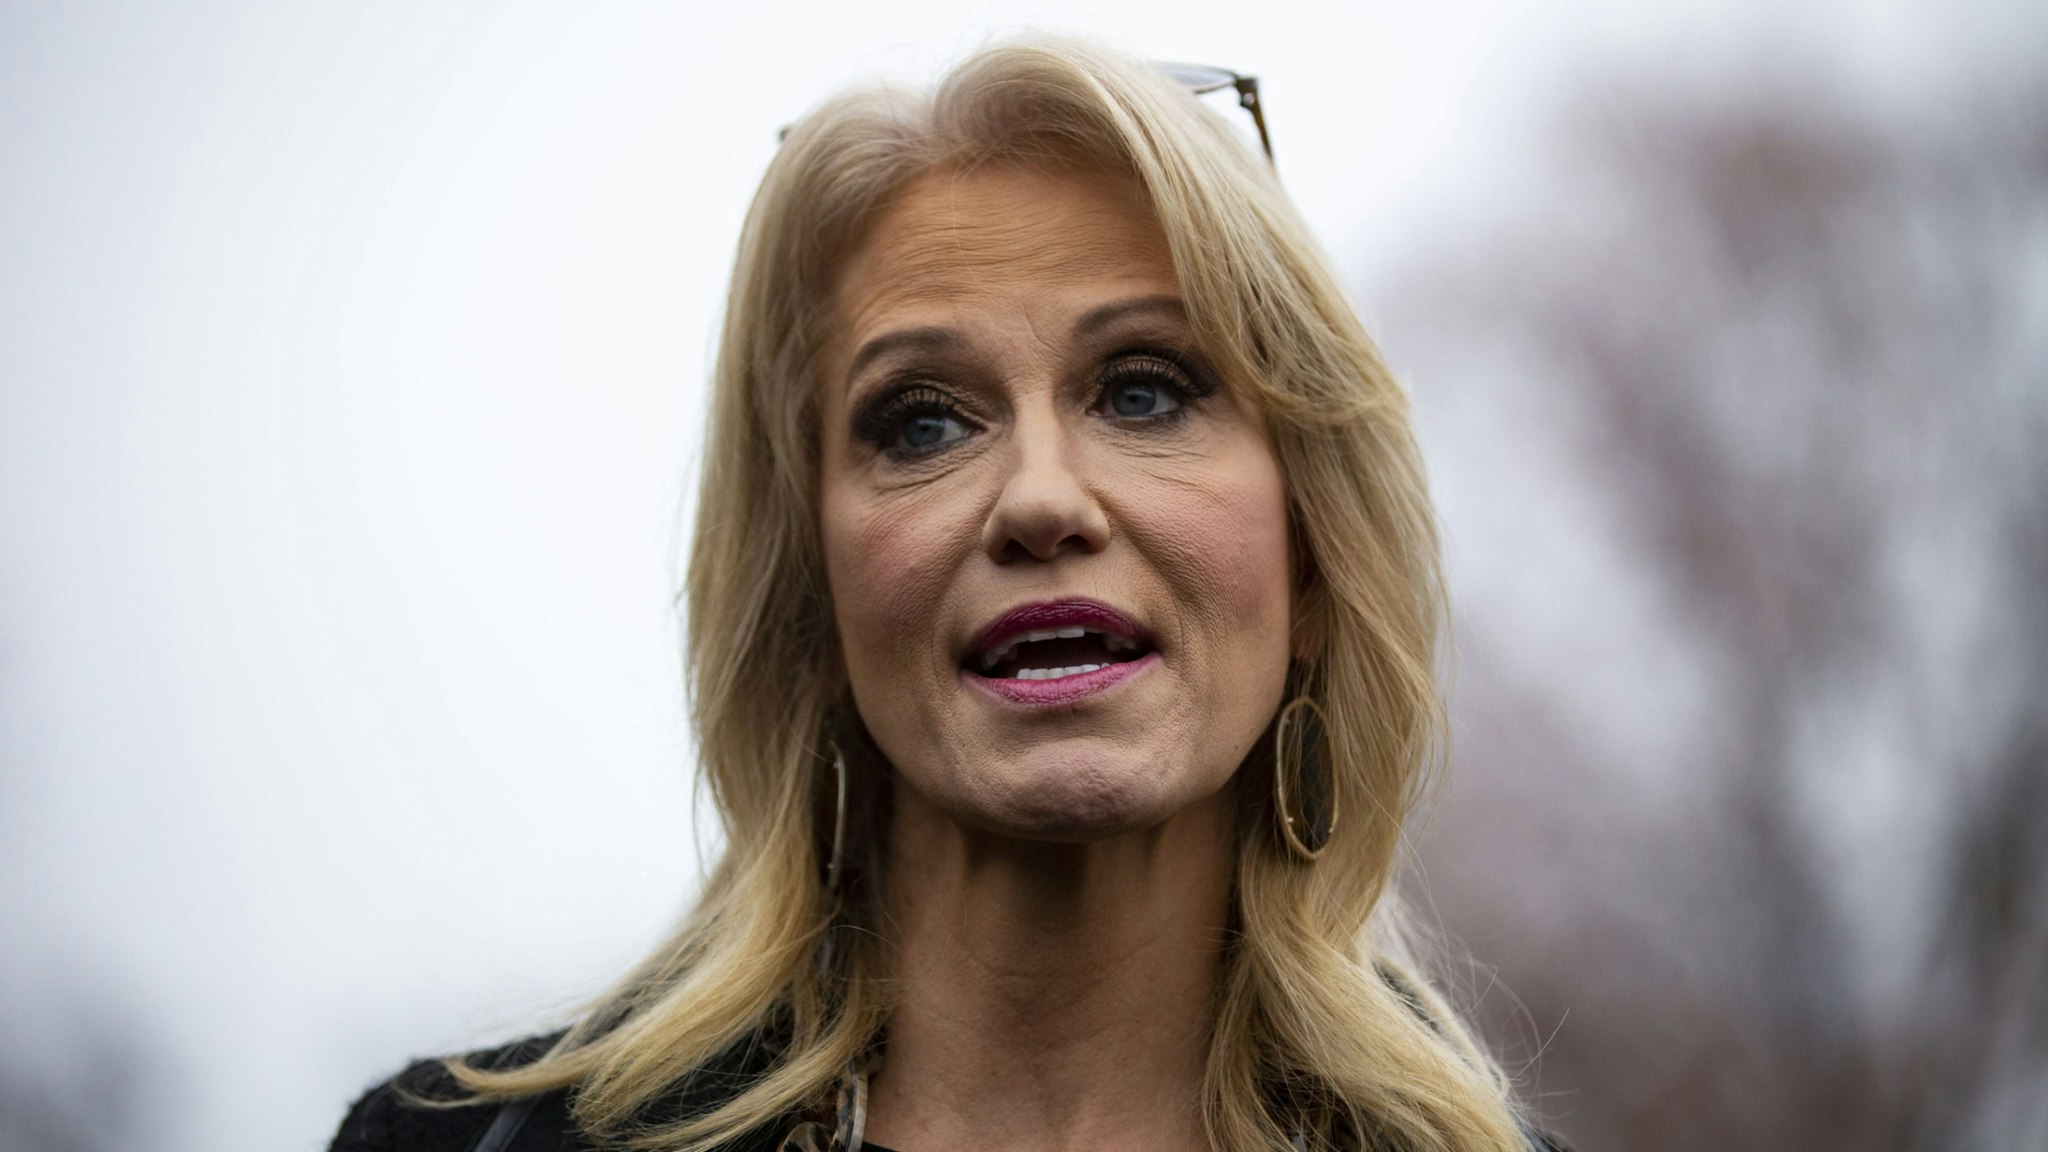 Kellyanne Conway, senior advisor to U.S. President Donald Trump, speaks to members of the media following a television interview at the White House in New York, U.S., on Friday, Dec. 14, 2018.